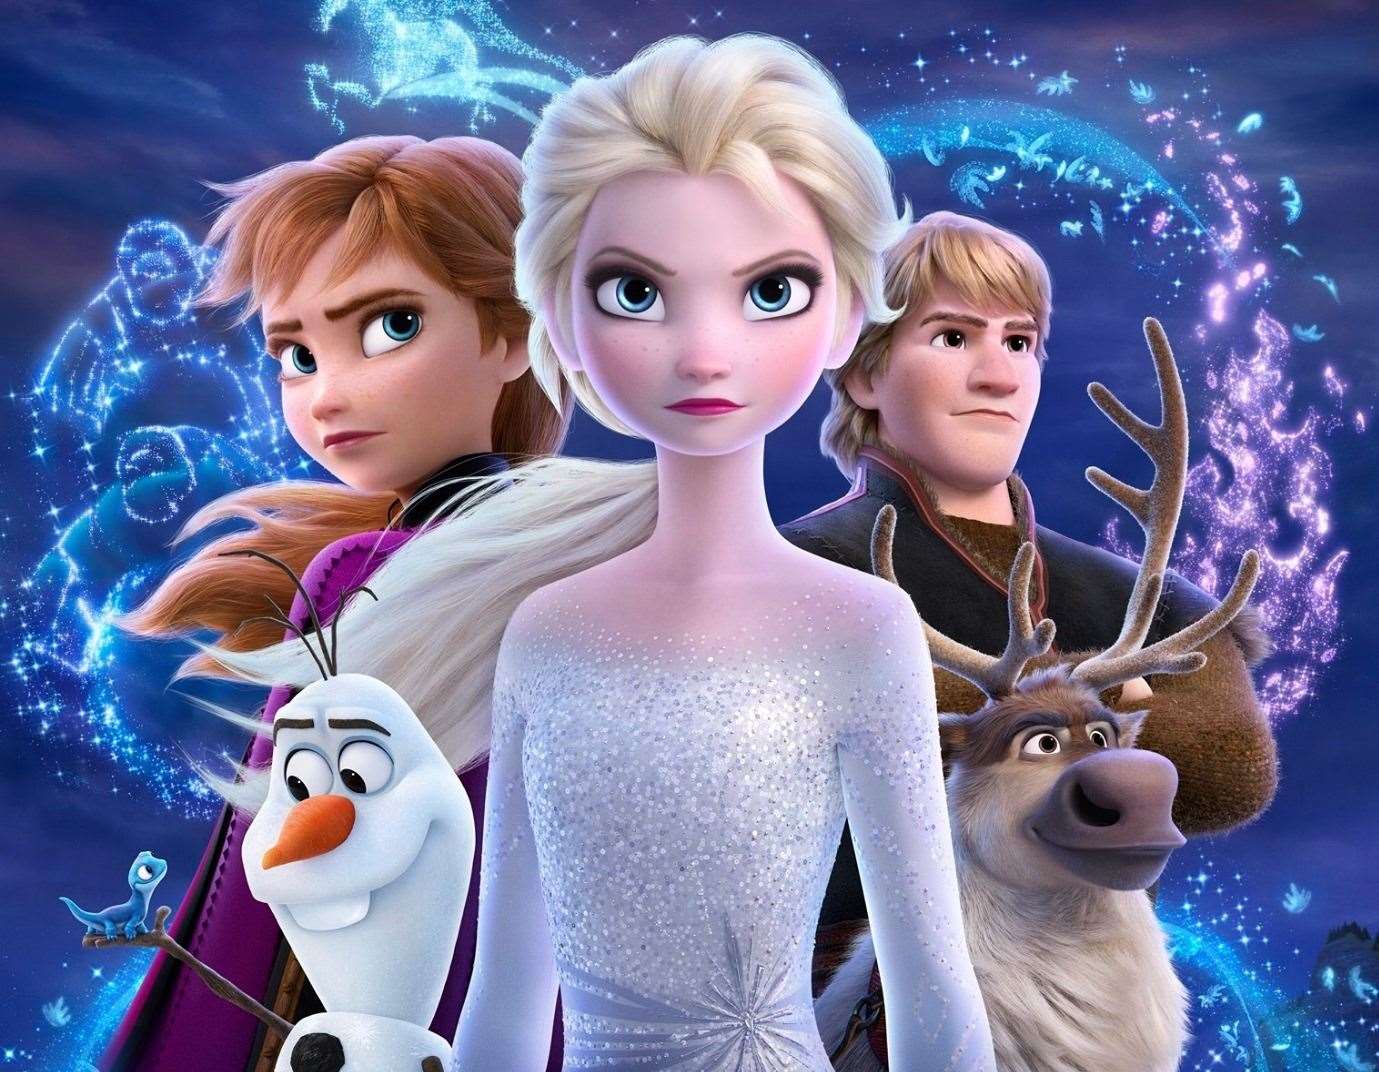 The swimming sessions are Frozen 2 themed